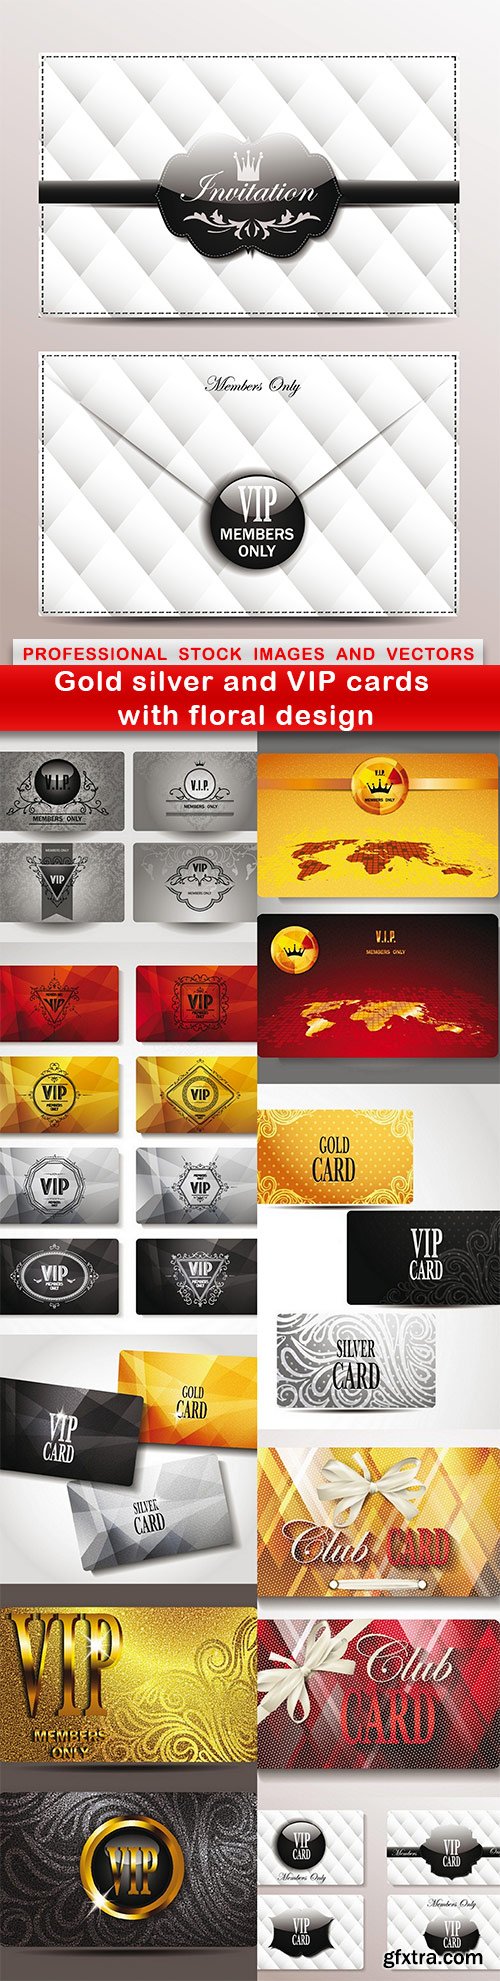 Gold silver and VIP cards with floral design - 9 EPS